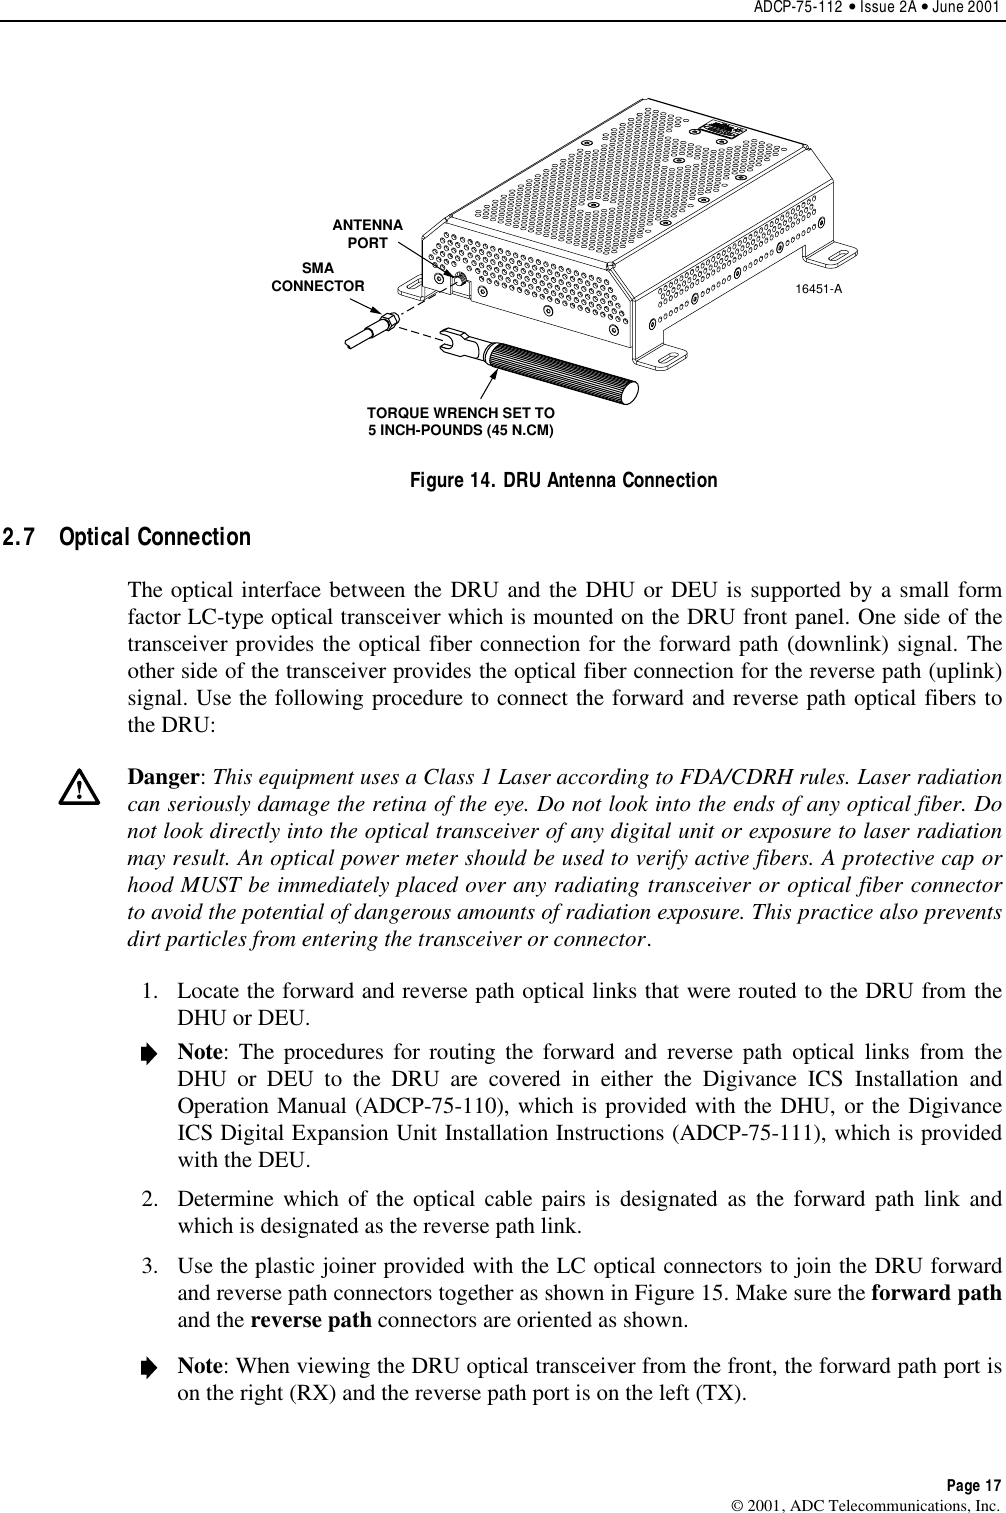 ADCP-75-112 • Issue 2A • June 2001Page 17© 2001, ADC Telecommunications, Inc.ANTENNAPORTSMACONNECTOR16451-ATORQUE WRENCH SET TO5 INCH-POUNDS (45 N.CM)Figure 14. DRU Antenna Connection2.7 Optical ConnectionThe optical interface between the DRU and the DHU or DEU is supported by a small formfactor LC-type optical transceiver which is mounted on the DRU front panel. One side of thetransceiver provides the optical fiber connection for the forward path (downlink) signal. Theother side of the transceiver provides the optical fiber connection for the reverse path (uplink)signal. Use the following procedure to connect the forward and reverse path optical fibers tothe DRU:Danger:This equipment uses aClass 1Laser according to FDA/CDRH rules. Laser radiationcan seriously damage the retina of the eye. Do not look into the ends of any optical fiber. Donot look directly into the optical transceiver of any digital unit or exposure to laser radiationmay result. An optical power meter should be used to verify active fibers. Aprotective cap orhood MUST be immediately placed over any radiating transceiver or optical fiber connectorto avoid the potential of dangerous amounts of radiation exposure. This practice also preventsdirt particles from entering the transceiver or connector.1. Locate the forward and reverse path optical links that were routed to the DRU from theDHU or DEU.Note:The procedures for routing the forward and reverse path optical links from theDHU or DEU to the DRU are covered in either the Digivance ICS Installation andOperation Manual (ADCP-75-110), which is provided with the DHU, or the DigivanceICS Digital Expansion Unit Installation Instructions (ADCP-75-111), which is providedwith the DEU.2. Determine which of the optical cable pairs is designated as the forward path link andwhich is designated as the reverse path link.3. Use the plastic joiner provided with the LC optical connectors to join the DRU forwardand reverse path connectors together as shown in Figure 15. Make sure the forward pathand the reverse path connectors are oriented as shown.Note:When viewing the DRU optical transceiver from the front, the forward path port ison the right (RX) and the reverse path port is on the left (TX).